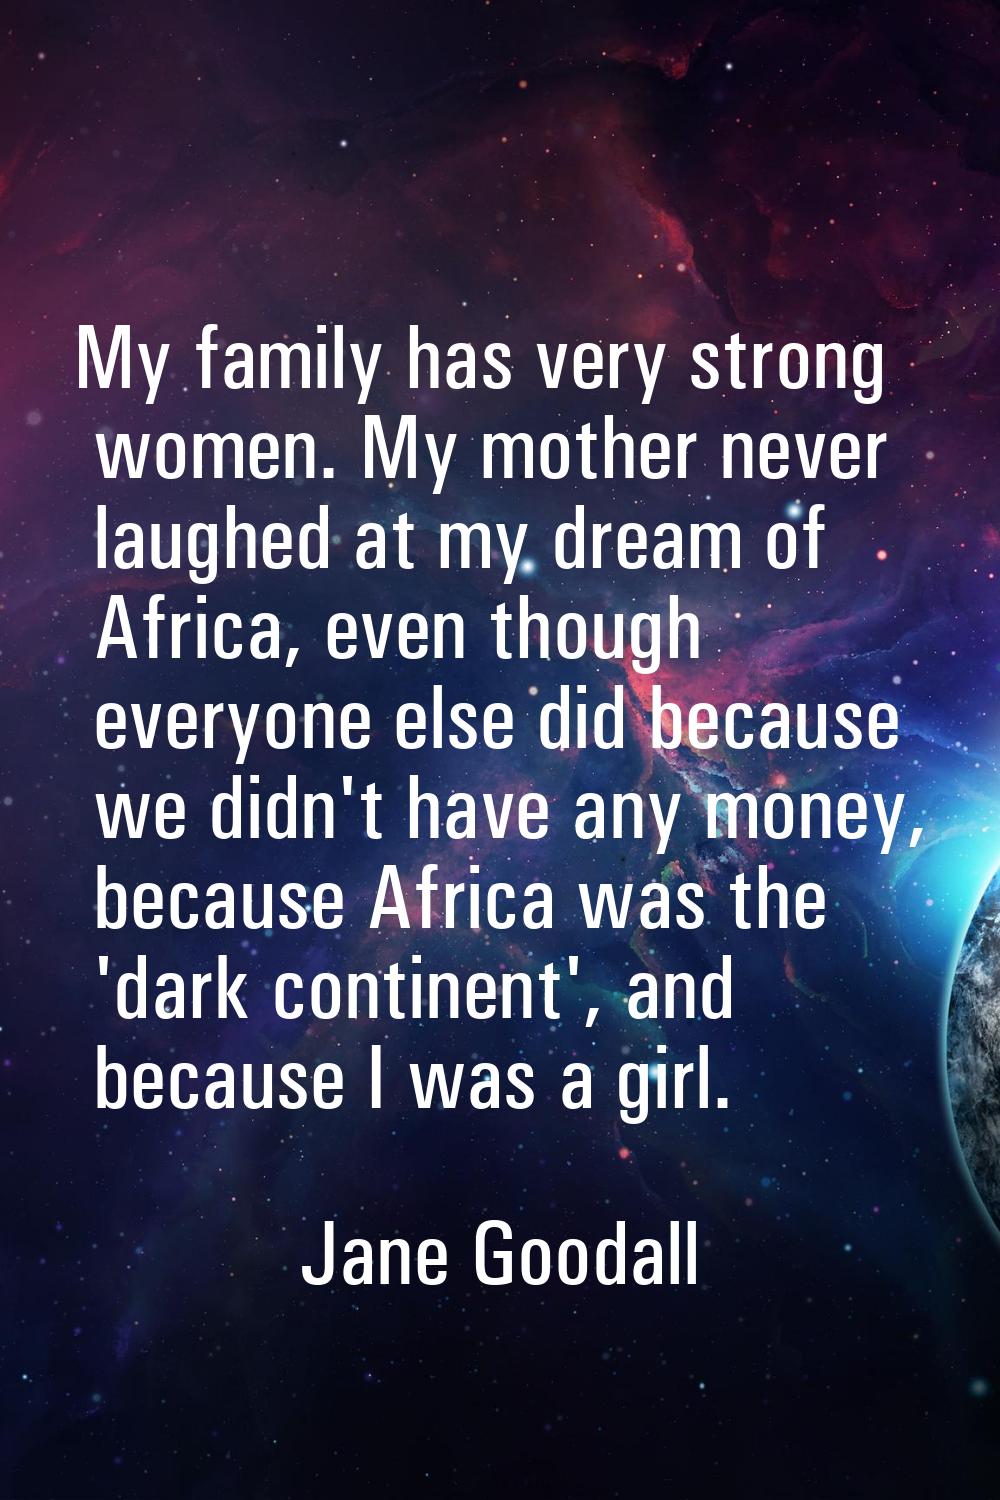 My family has very strong women. My mother never laughed at my dream of Africa, even though everyon